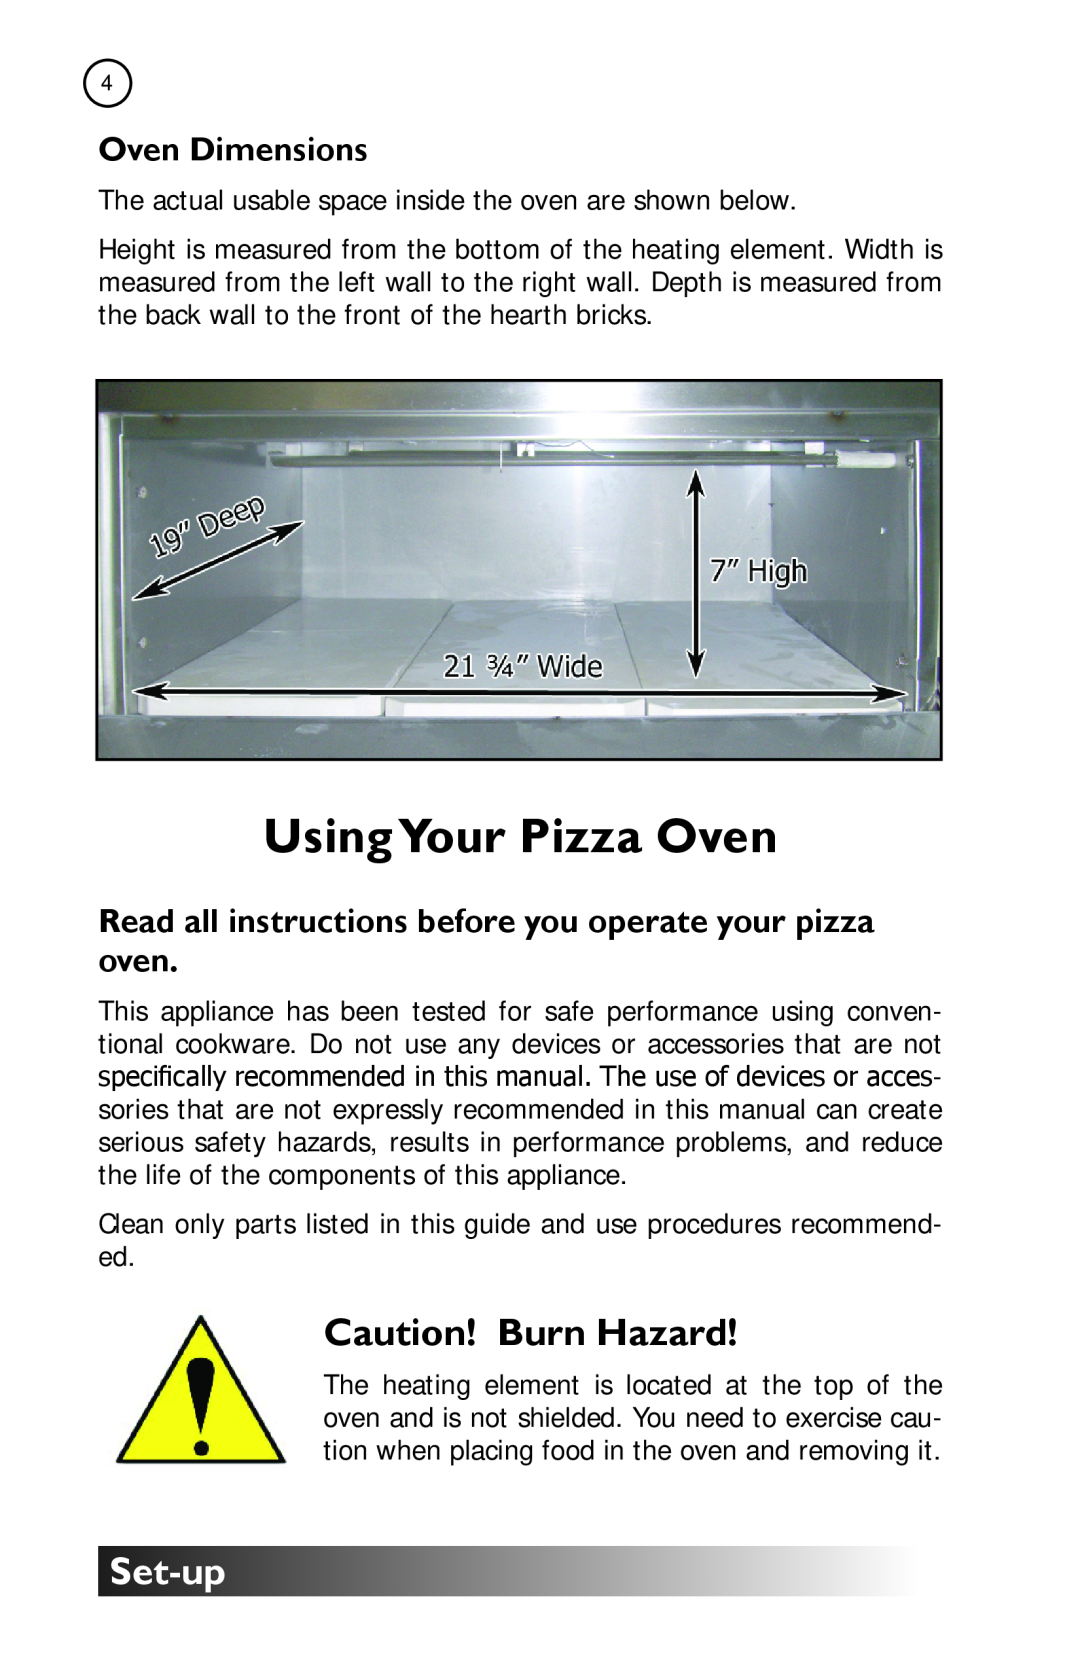 Cal Flame BBQ10967E manual UsingYour Pizza Oven, Caution! Burn Hazard, Oven Dimensions, Set-up 